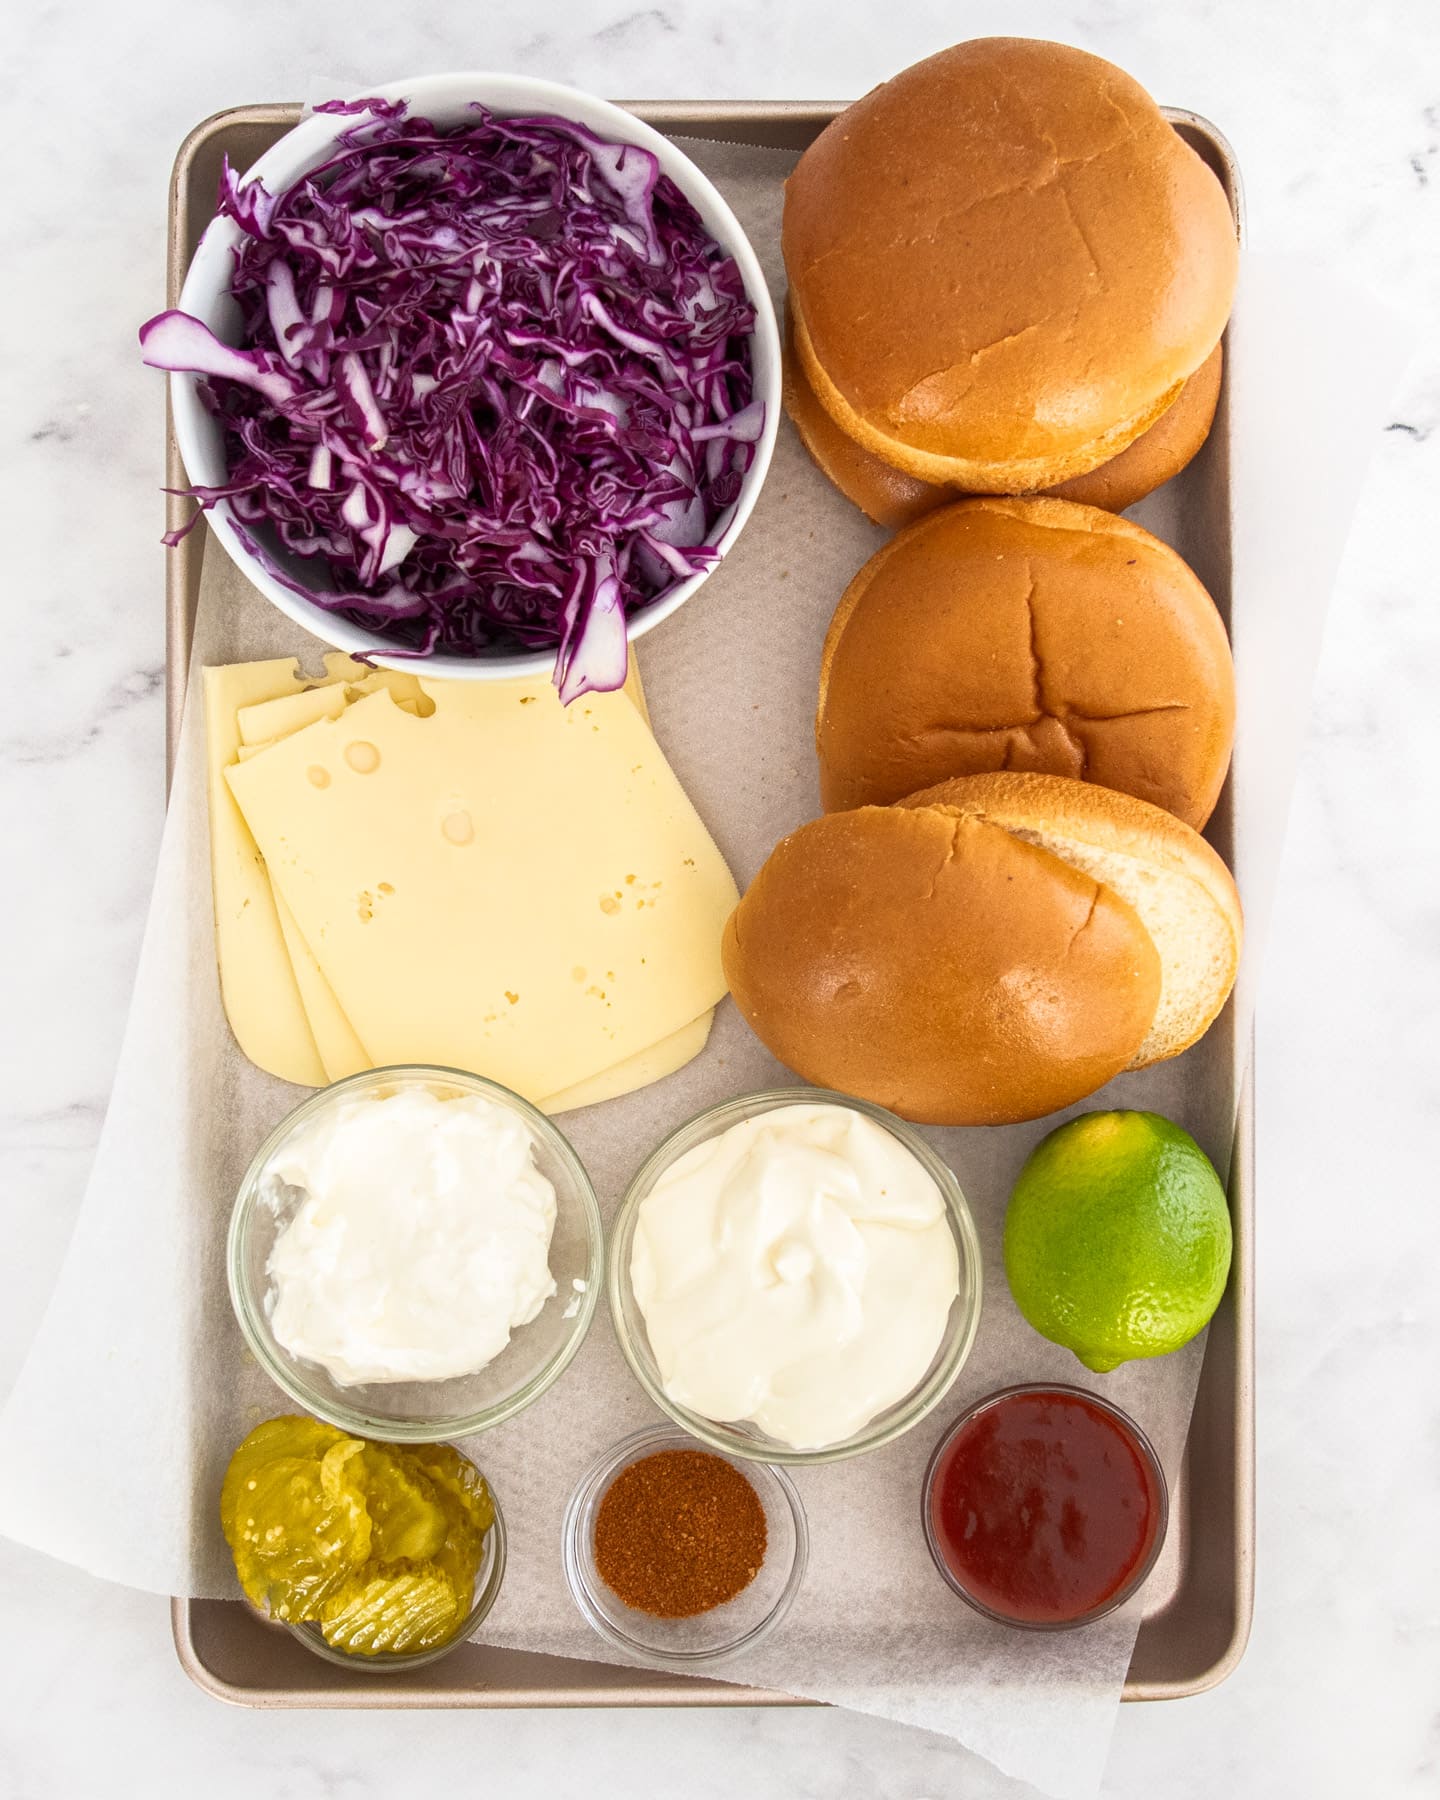 Ingredients for pulled beef burgers on a baking tray.